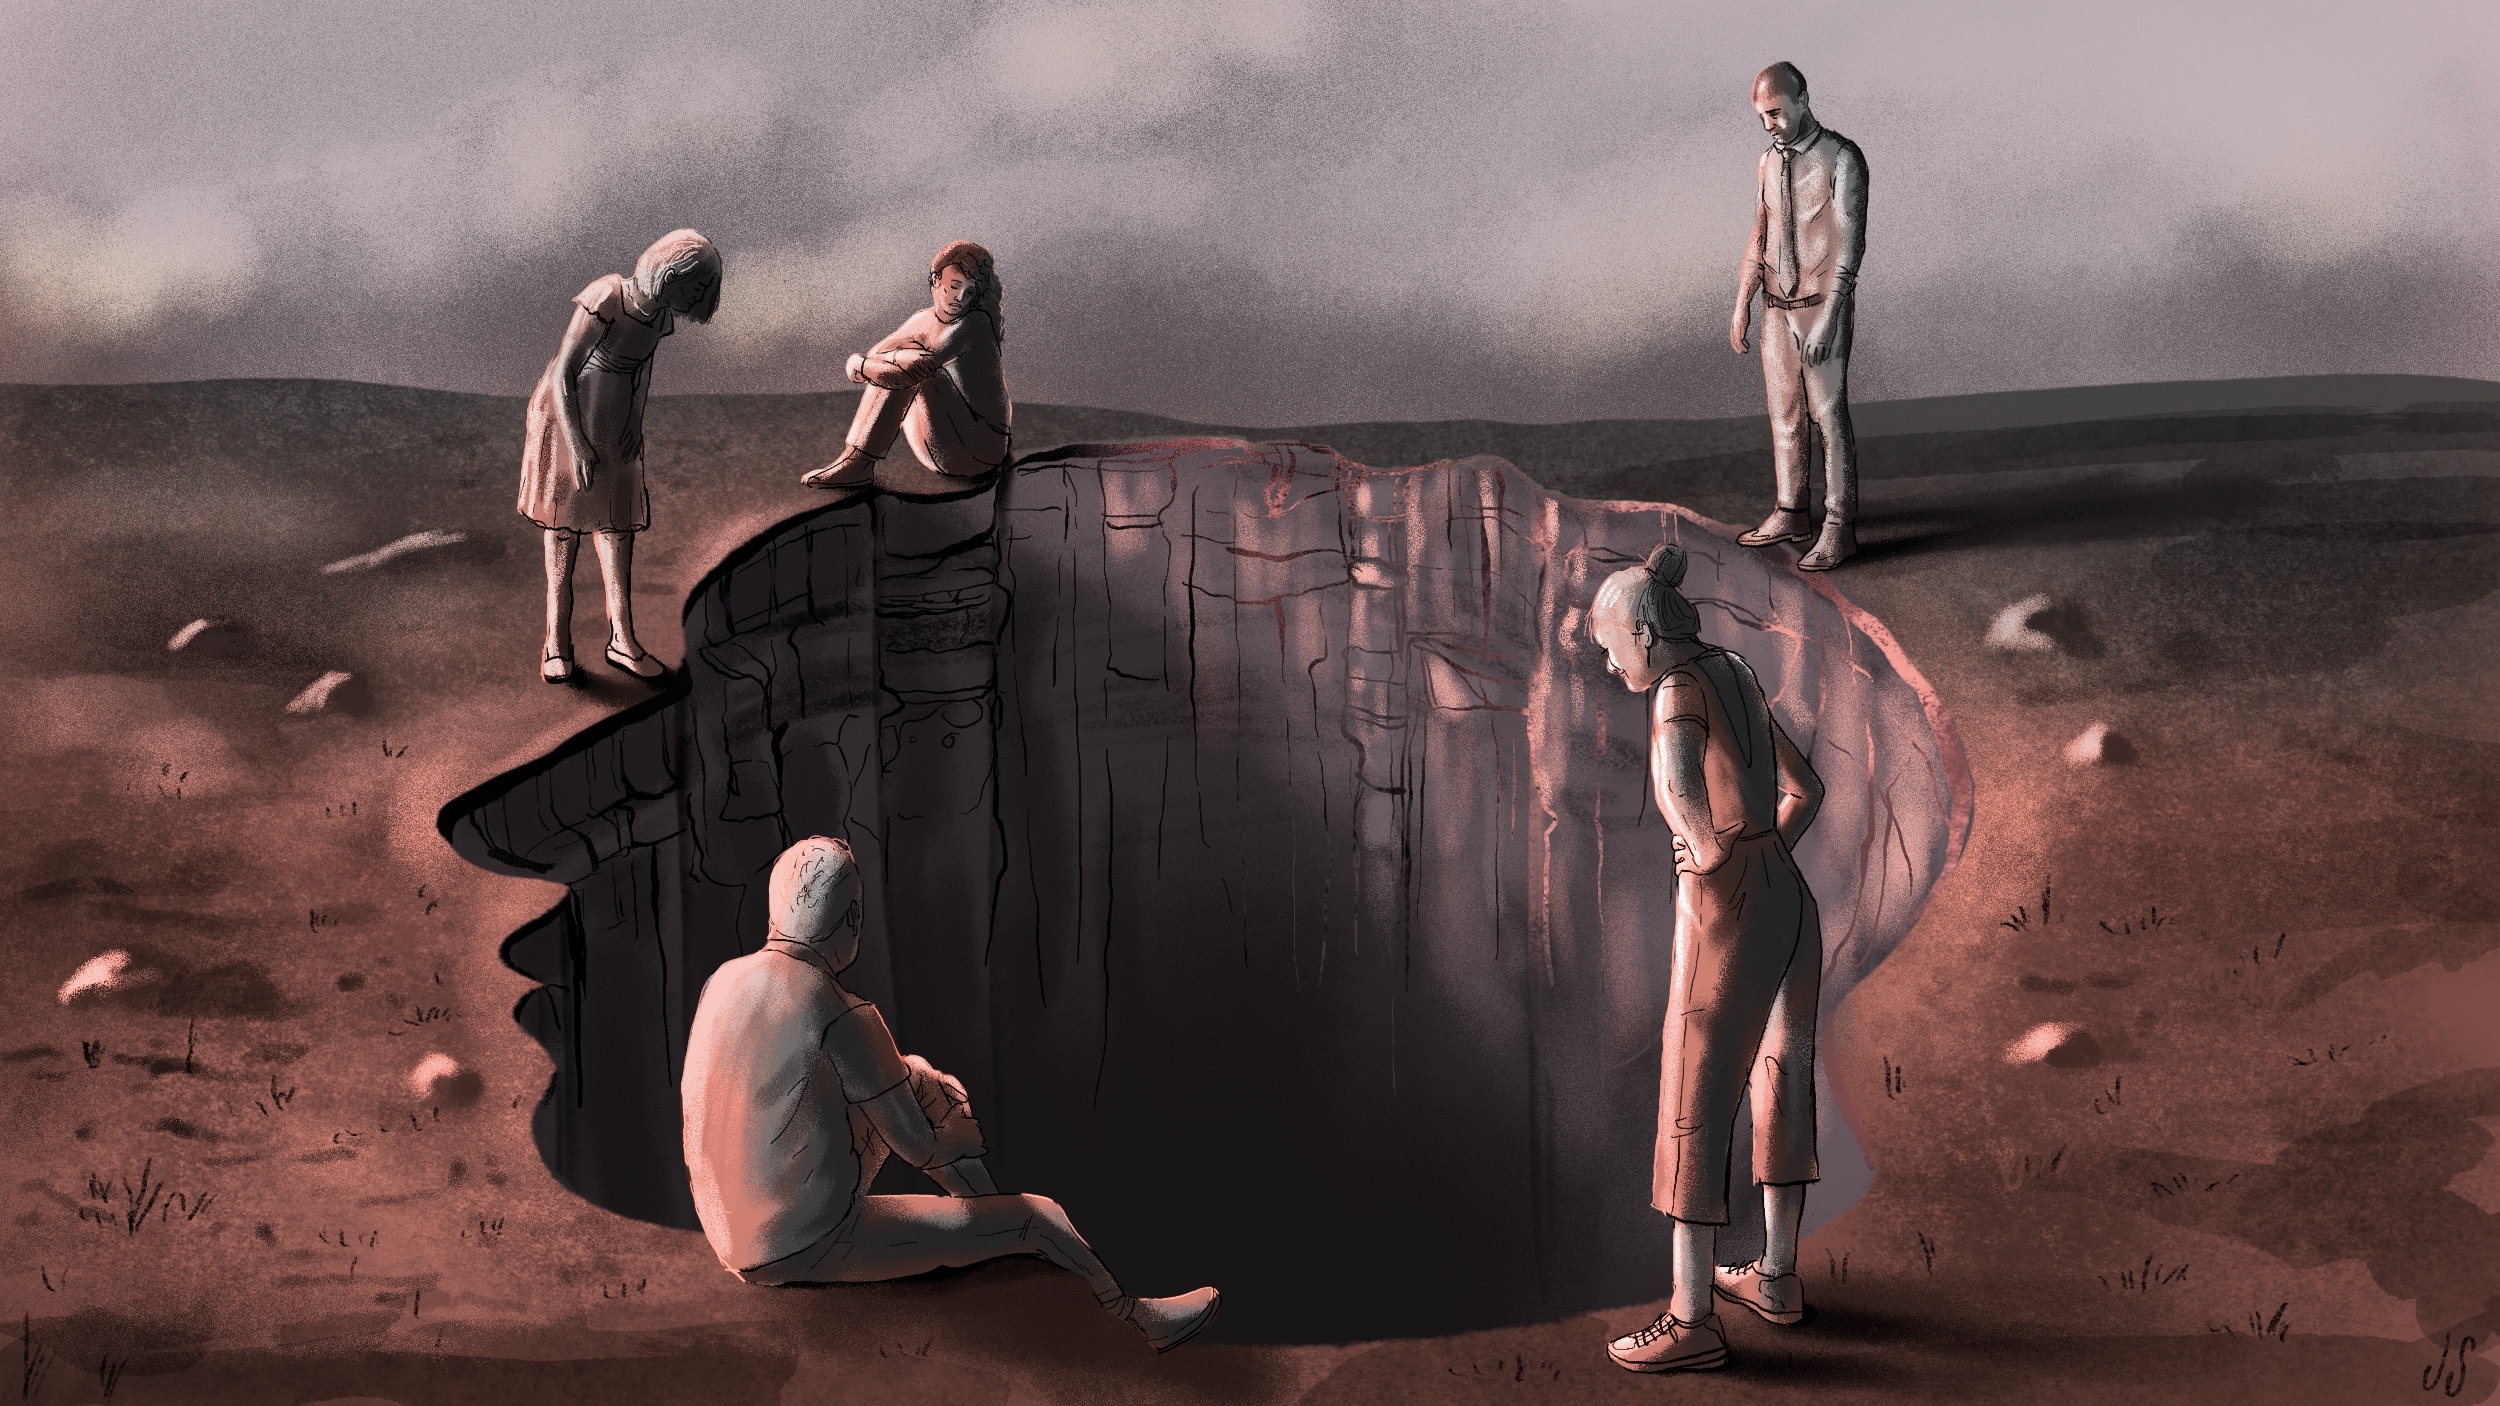 Five people stand or sit around a large, ominous hole in the ground, under a cloudy sky, reflecting on their struggles and supporting each other in raising mental health awareness.